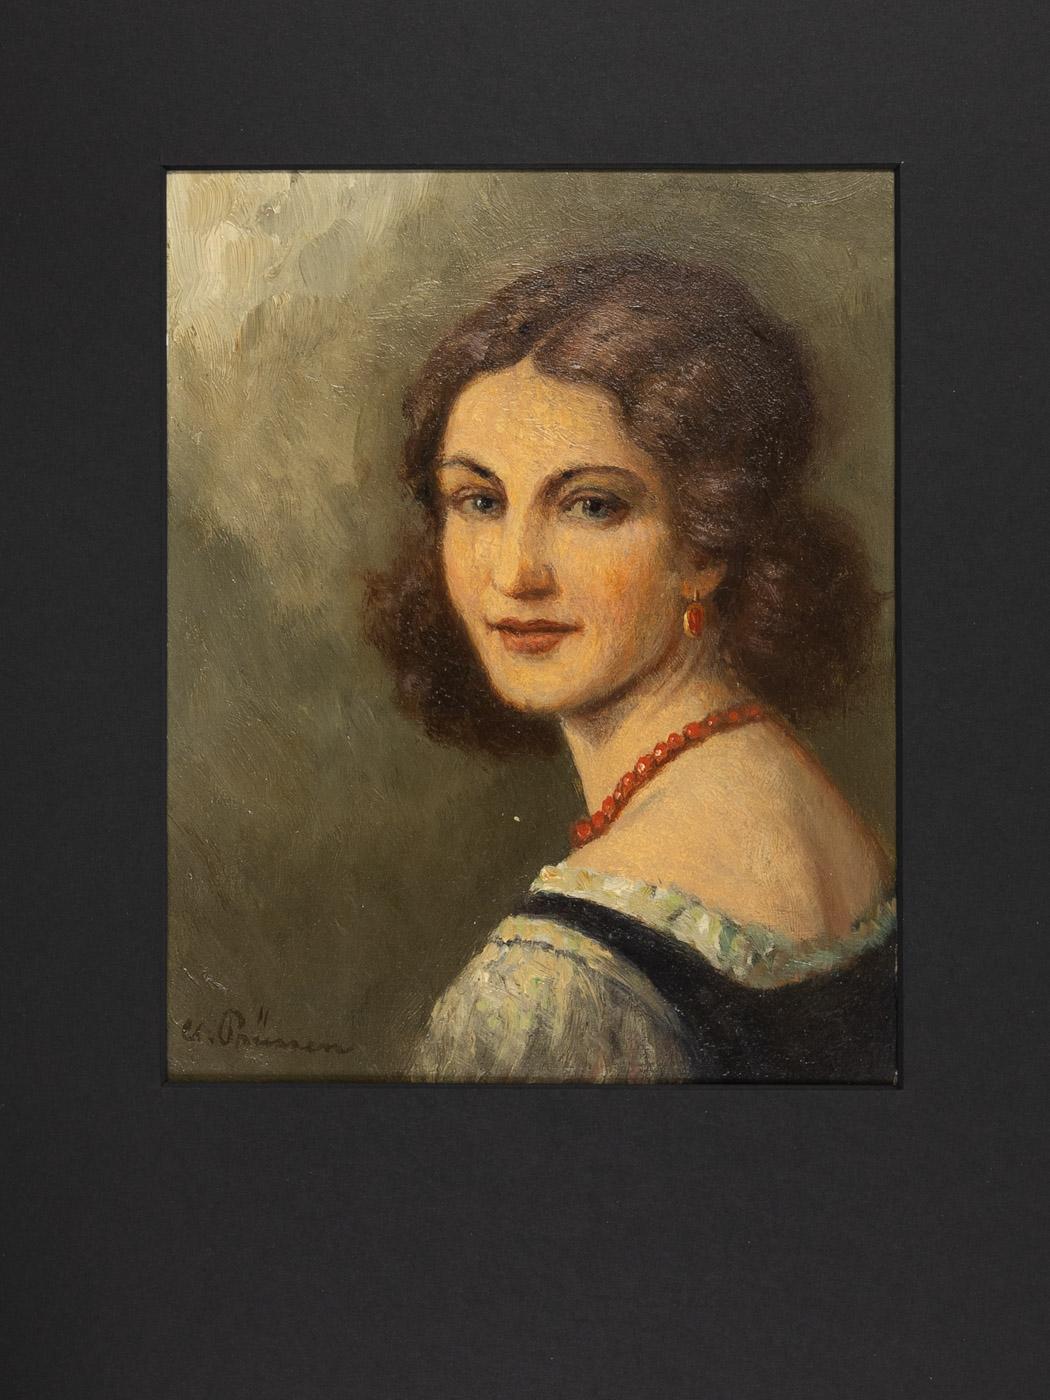 Clemens PRÜSSEN portrait of a woman from the 1920s. Düsseldorfer Schule. Oil on plate. Ready to hang, framed with a black passepartout in a real wood picture frame in black.

Size without frame: W 23 cm x H 28 cm.